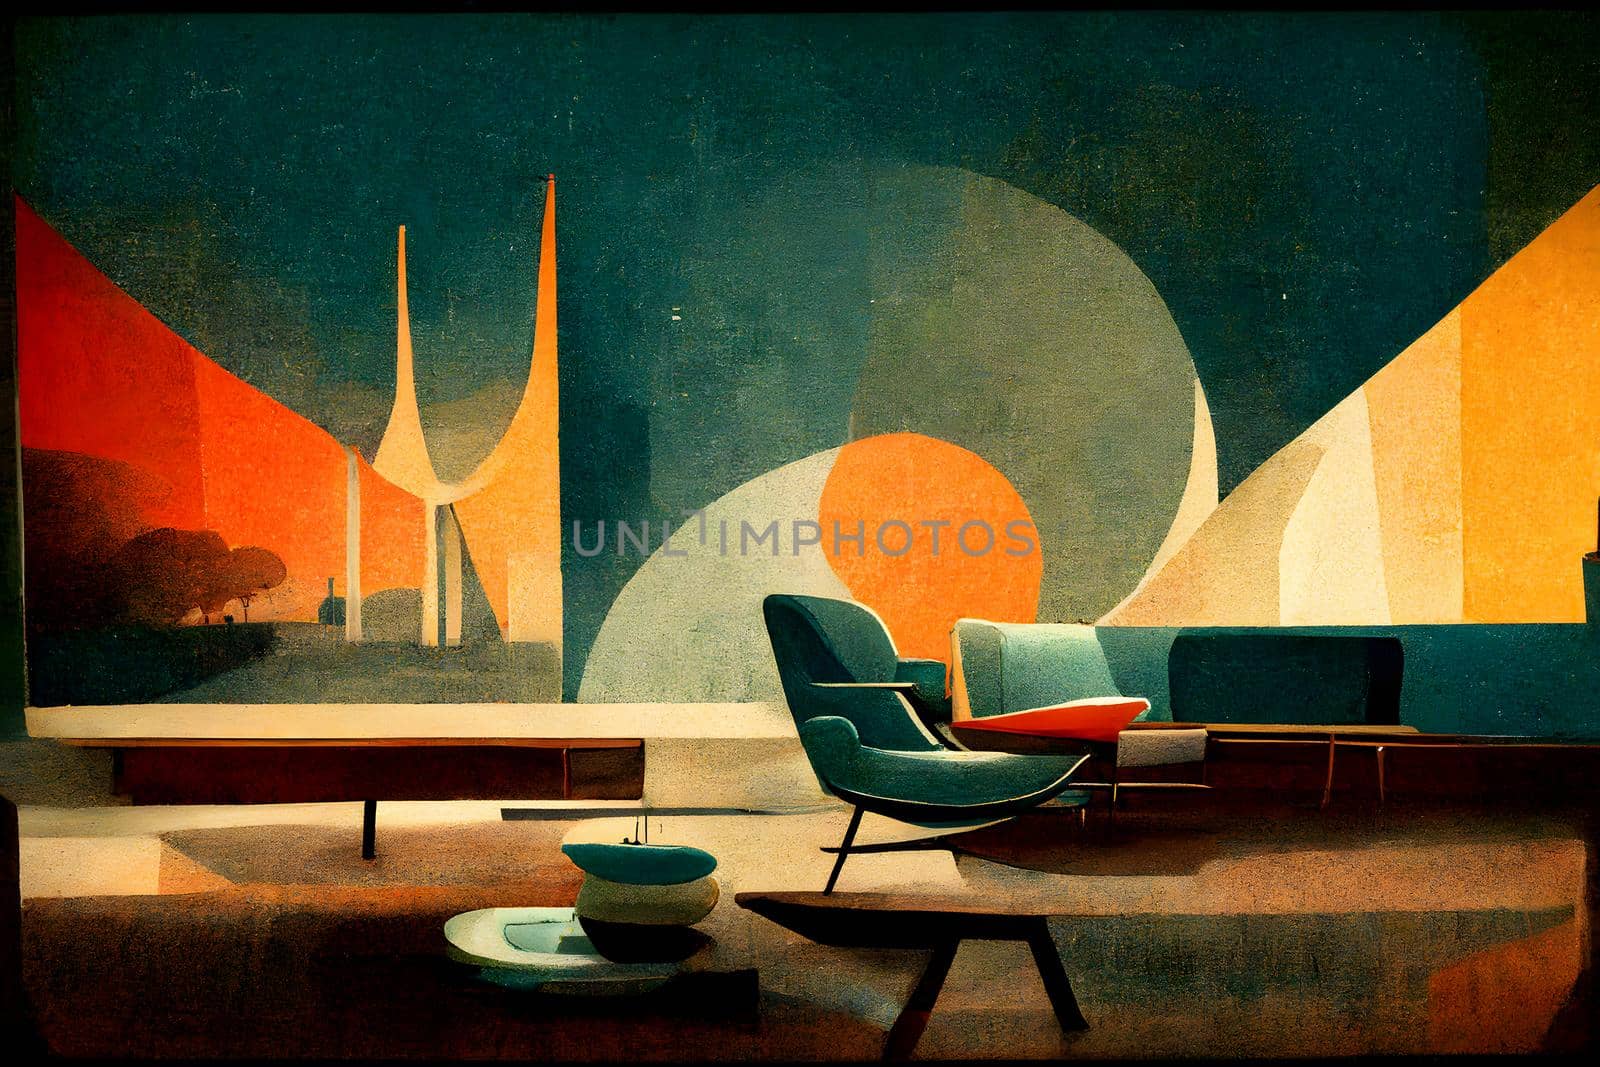 mid century modern abstract art, neural network generated picture. Digitally generated image. Not based on any actual scene or pattern.